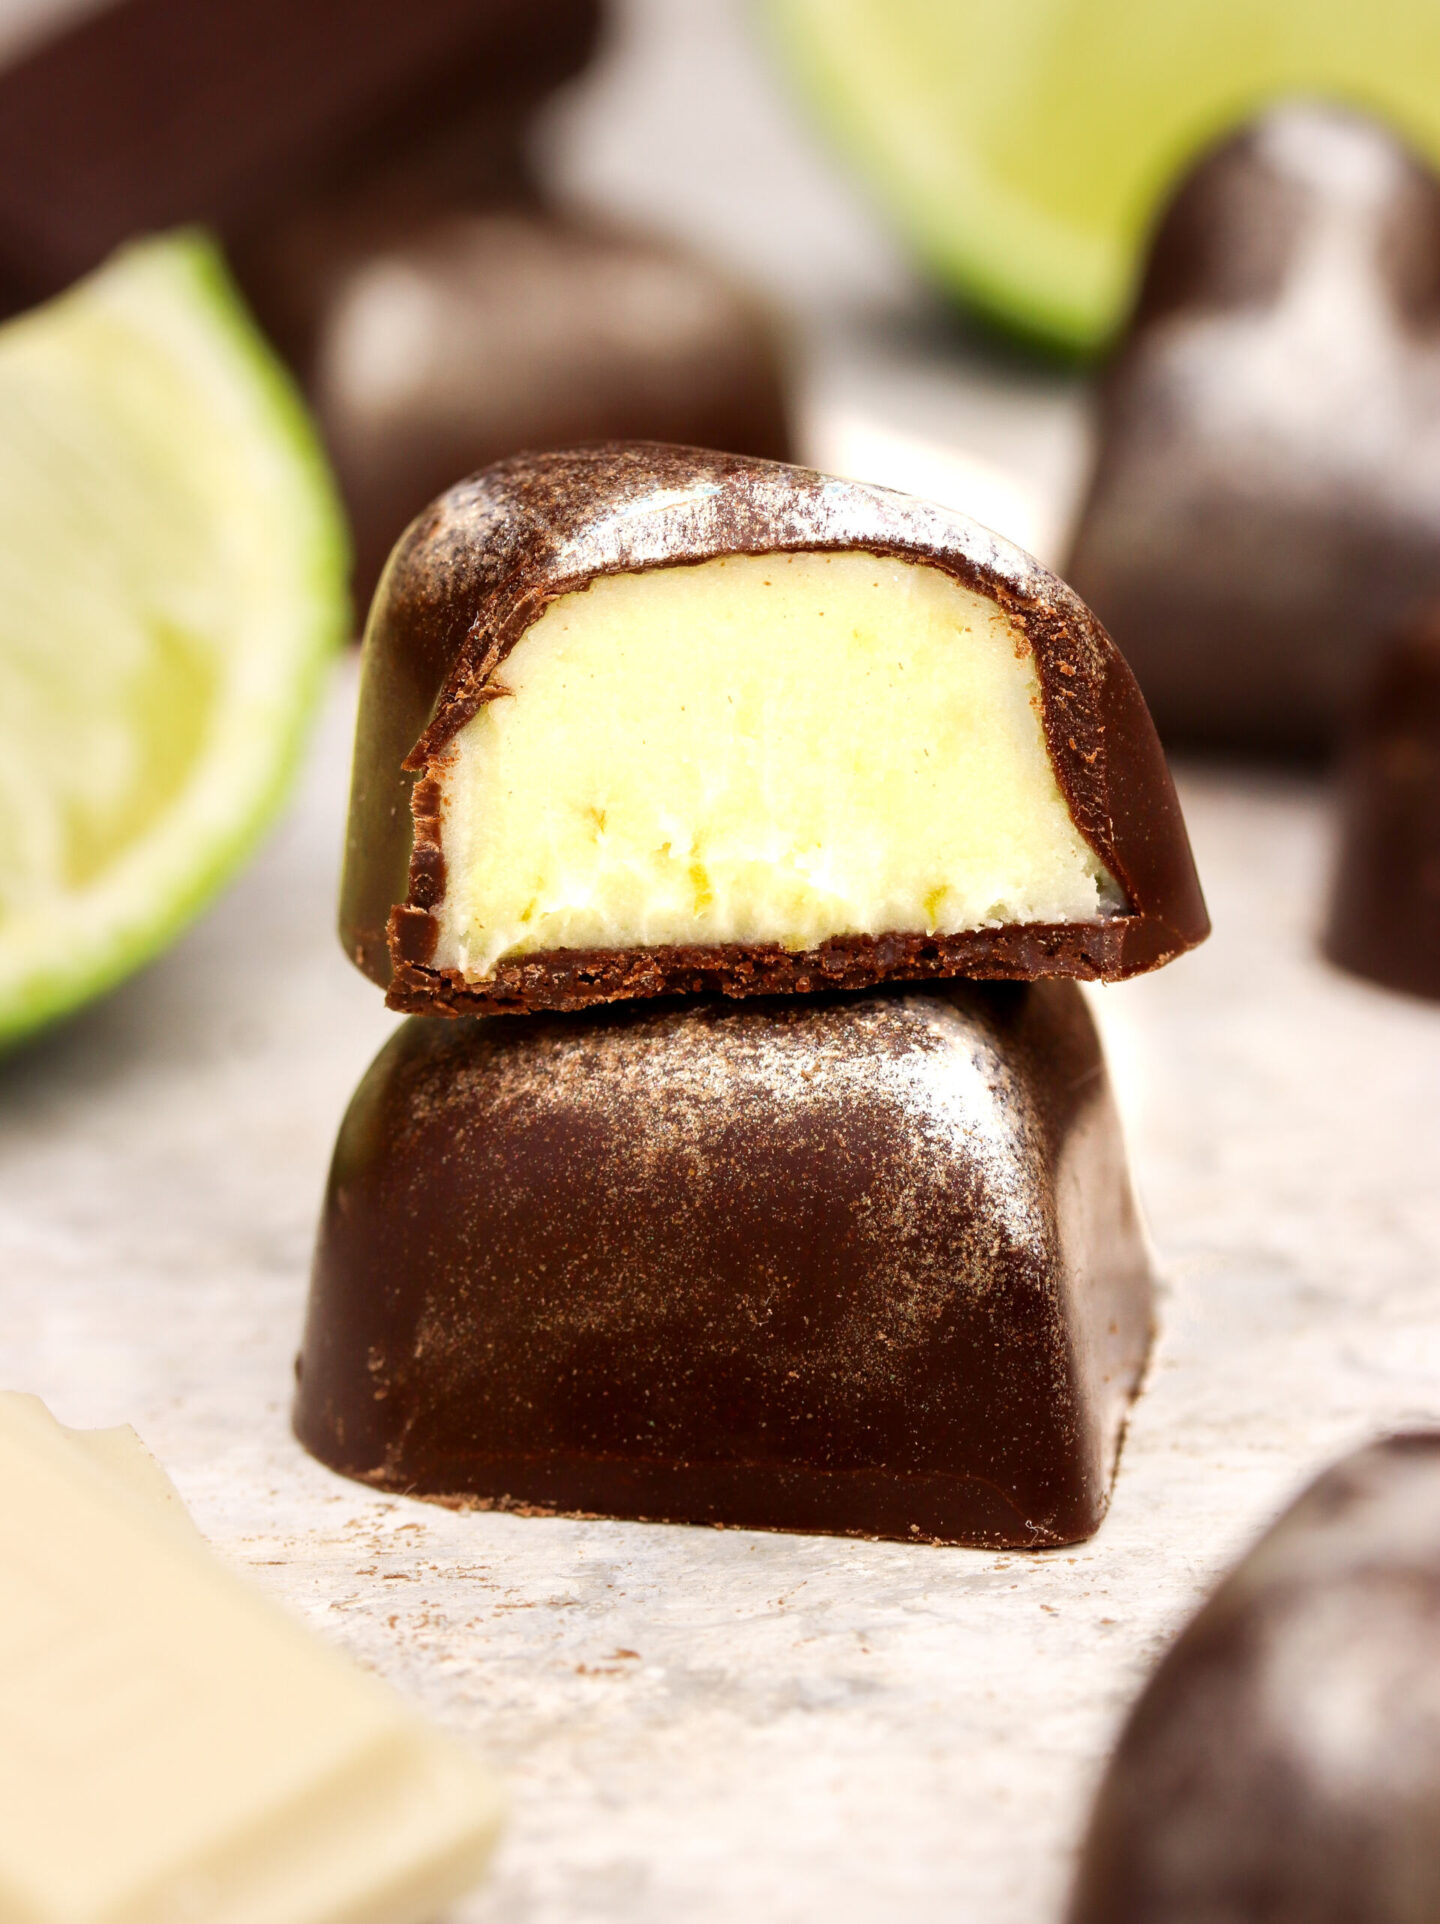 Buttery Lime & White Chocolate Pralines / Lime & Vit choklad Praliner